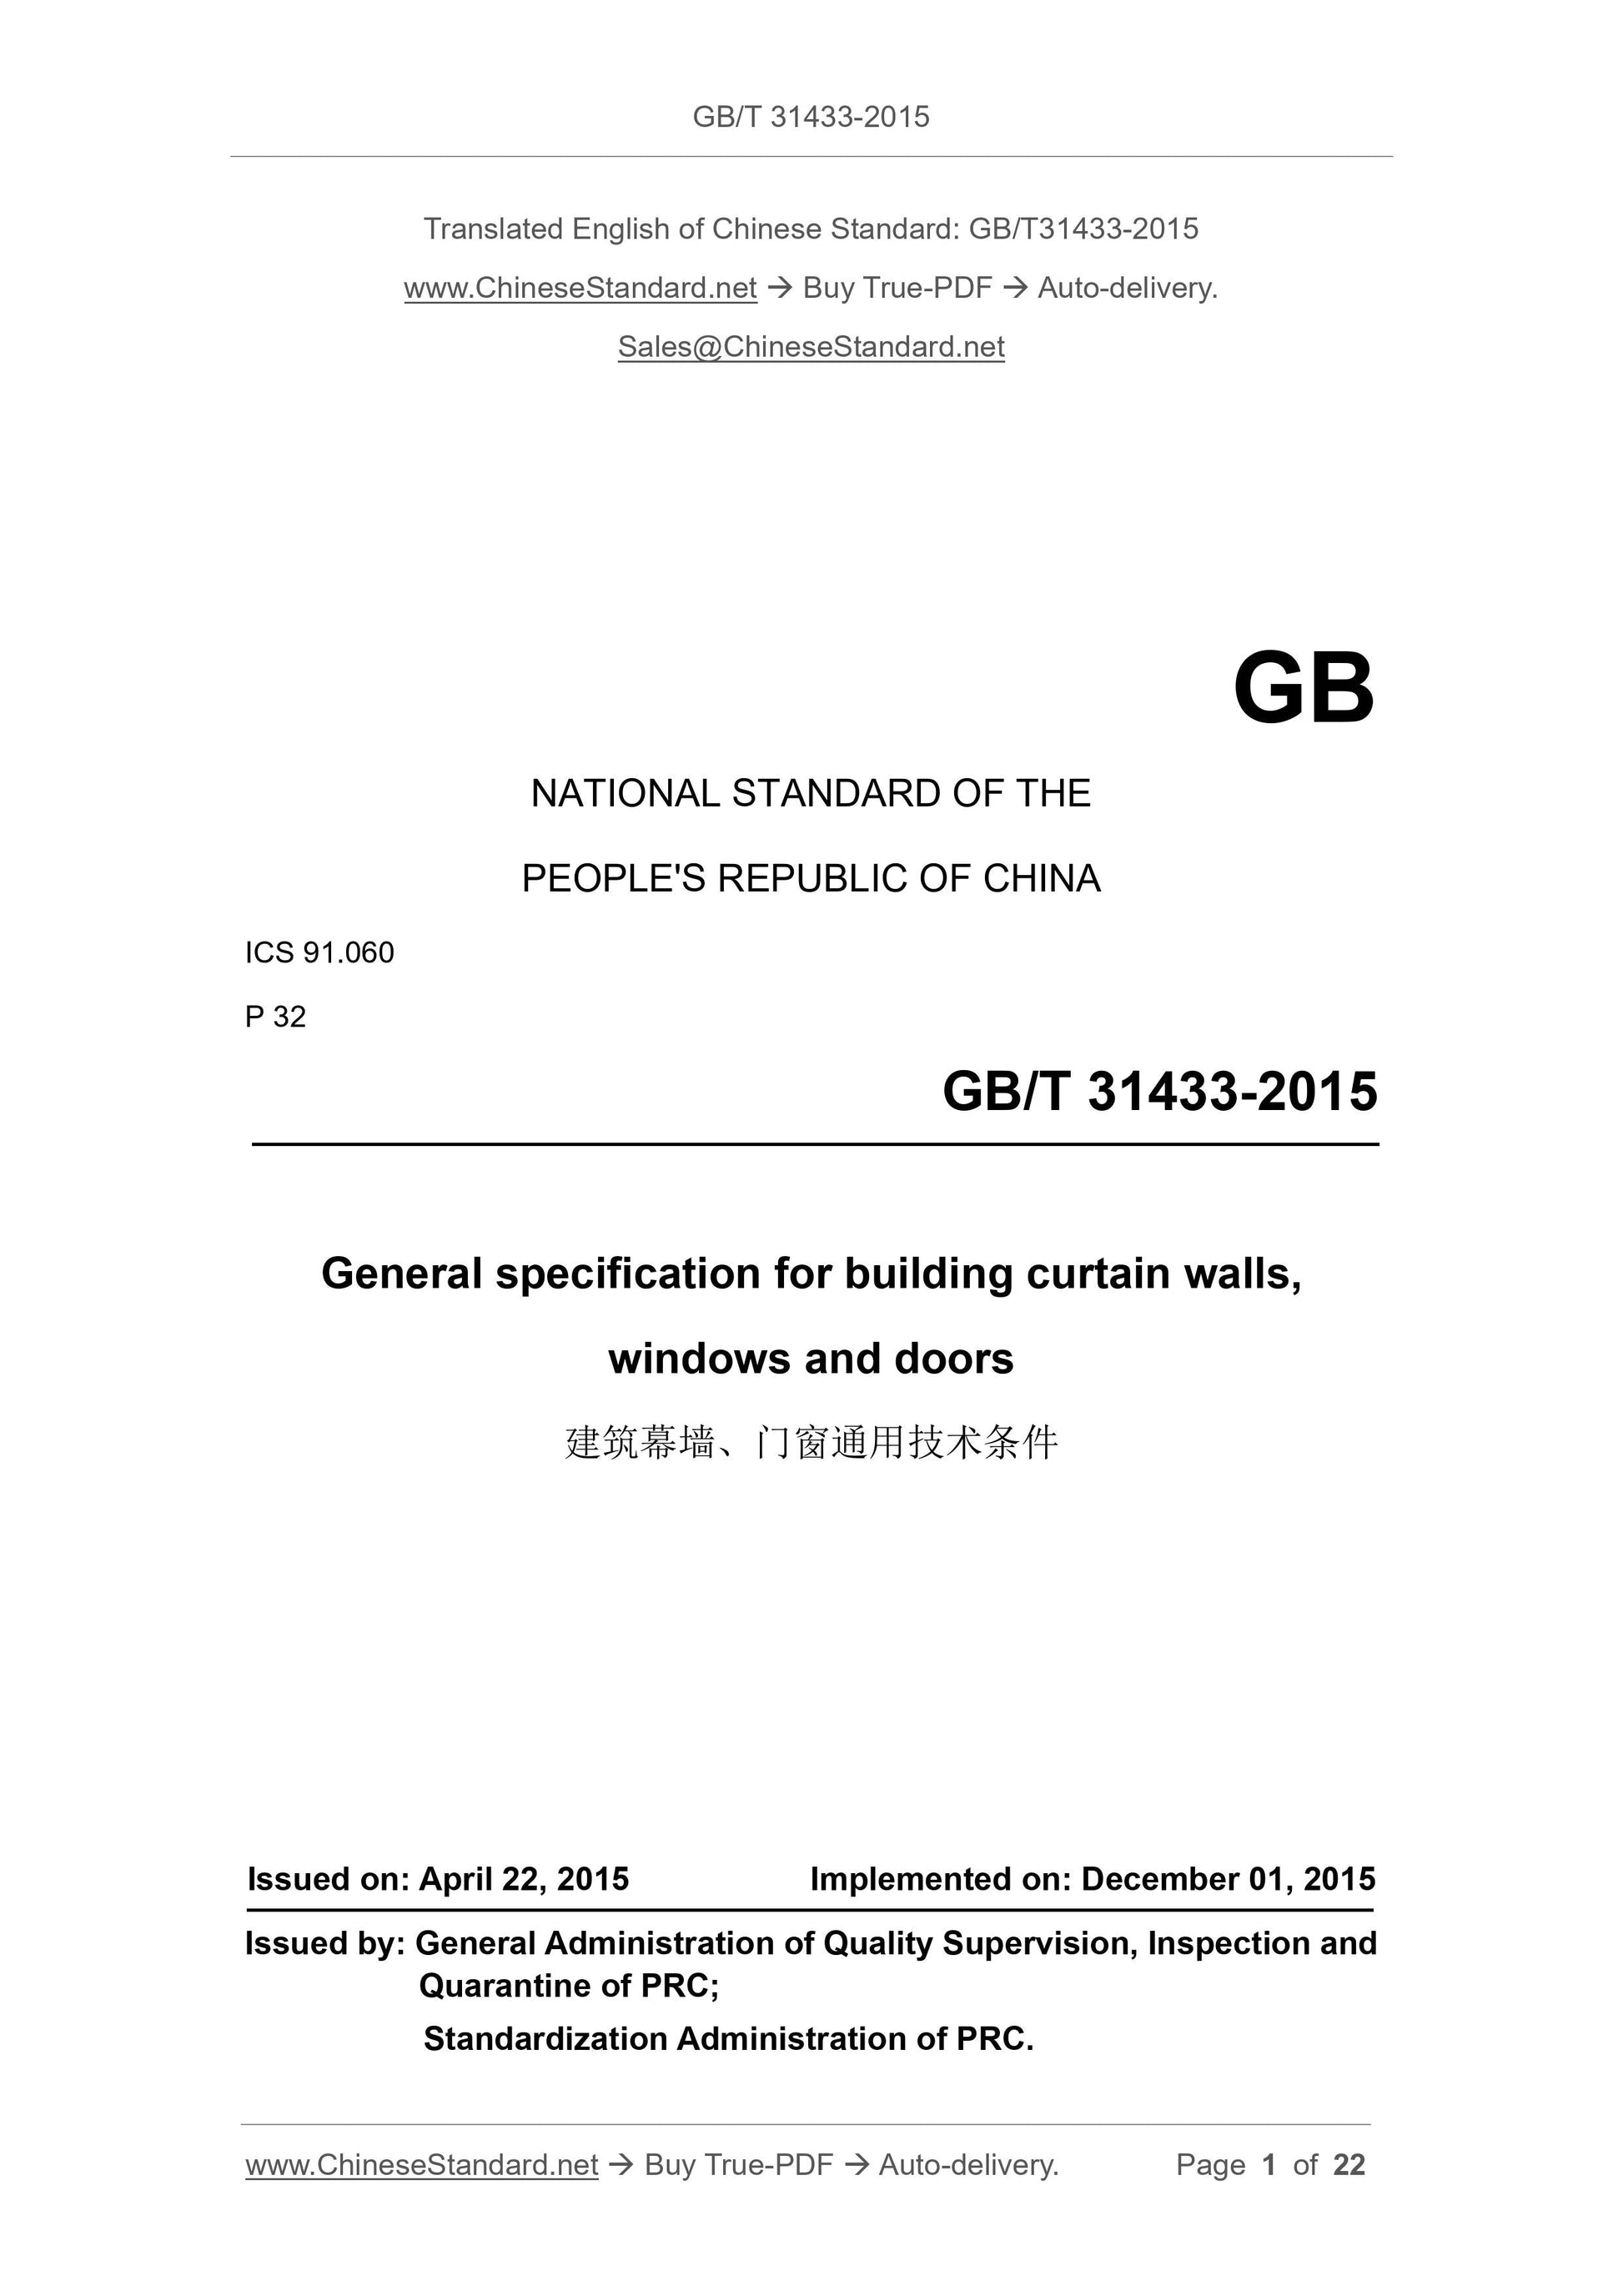 GB/T 31433-2015 Page 1